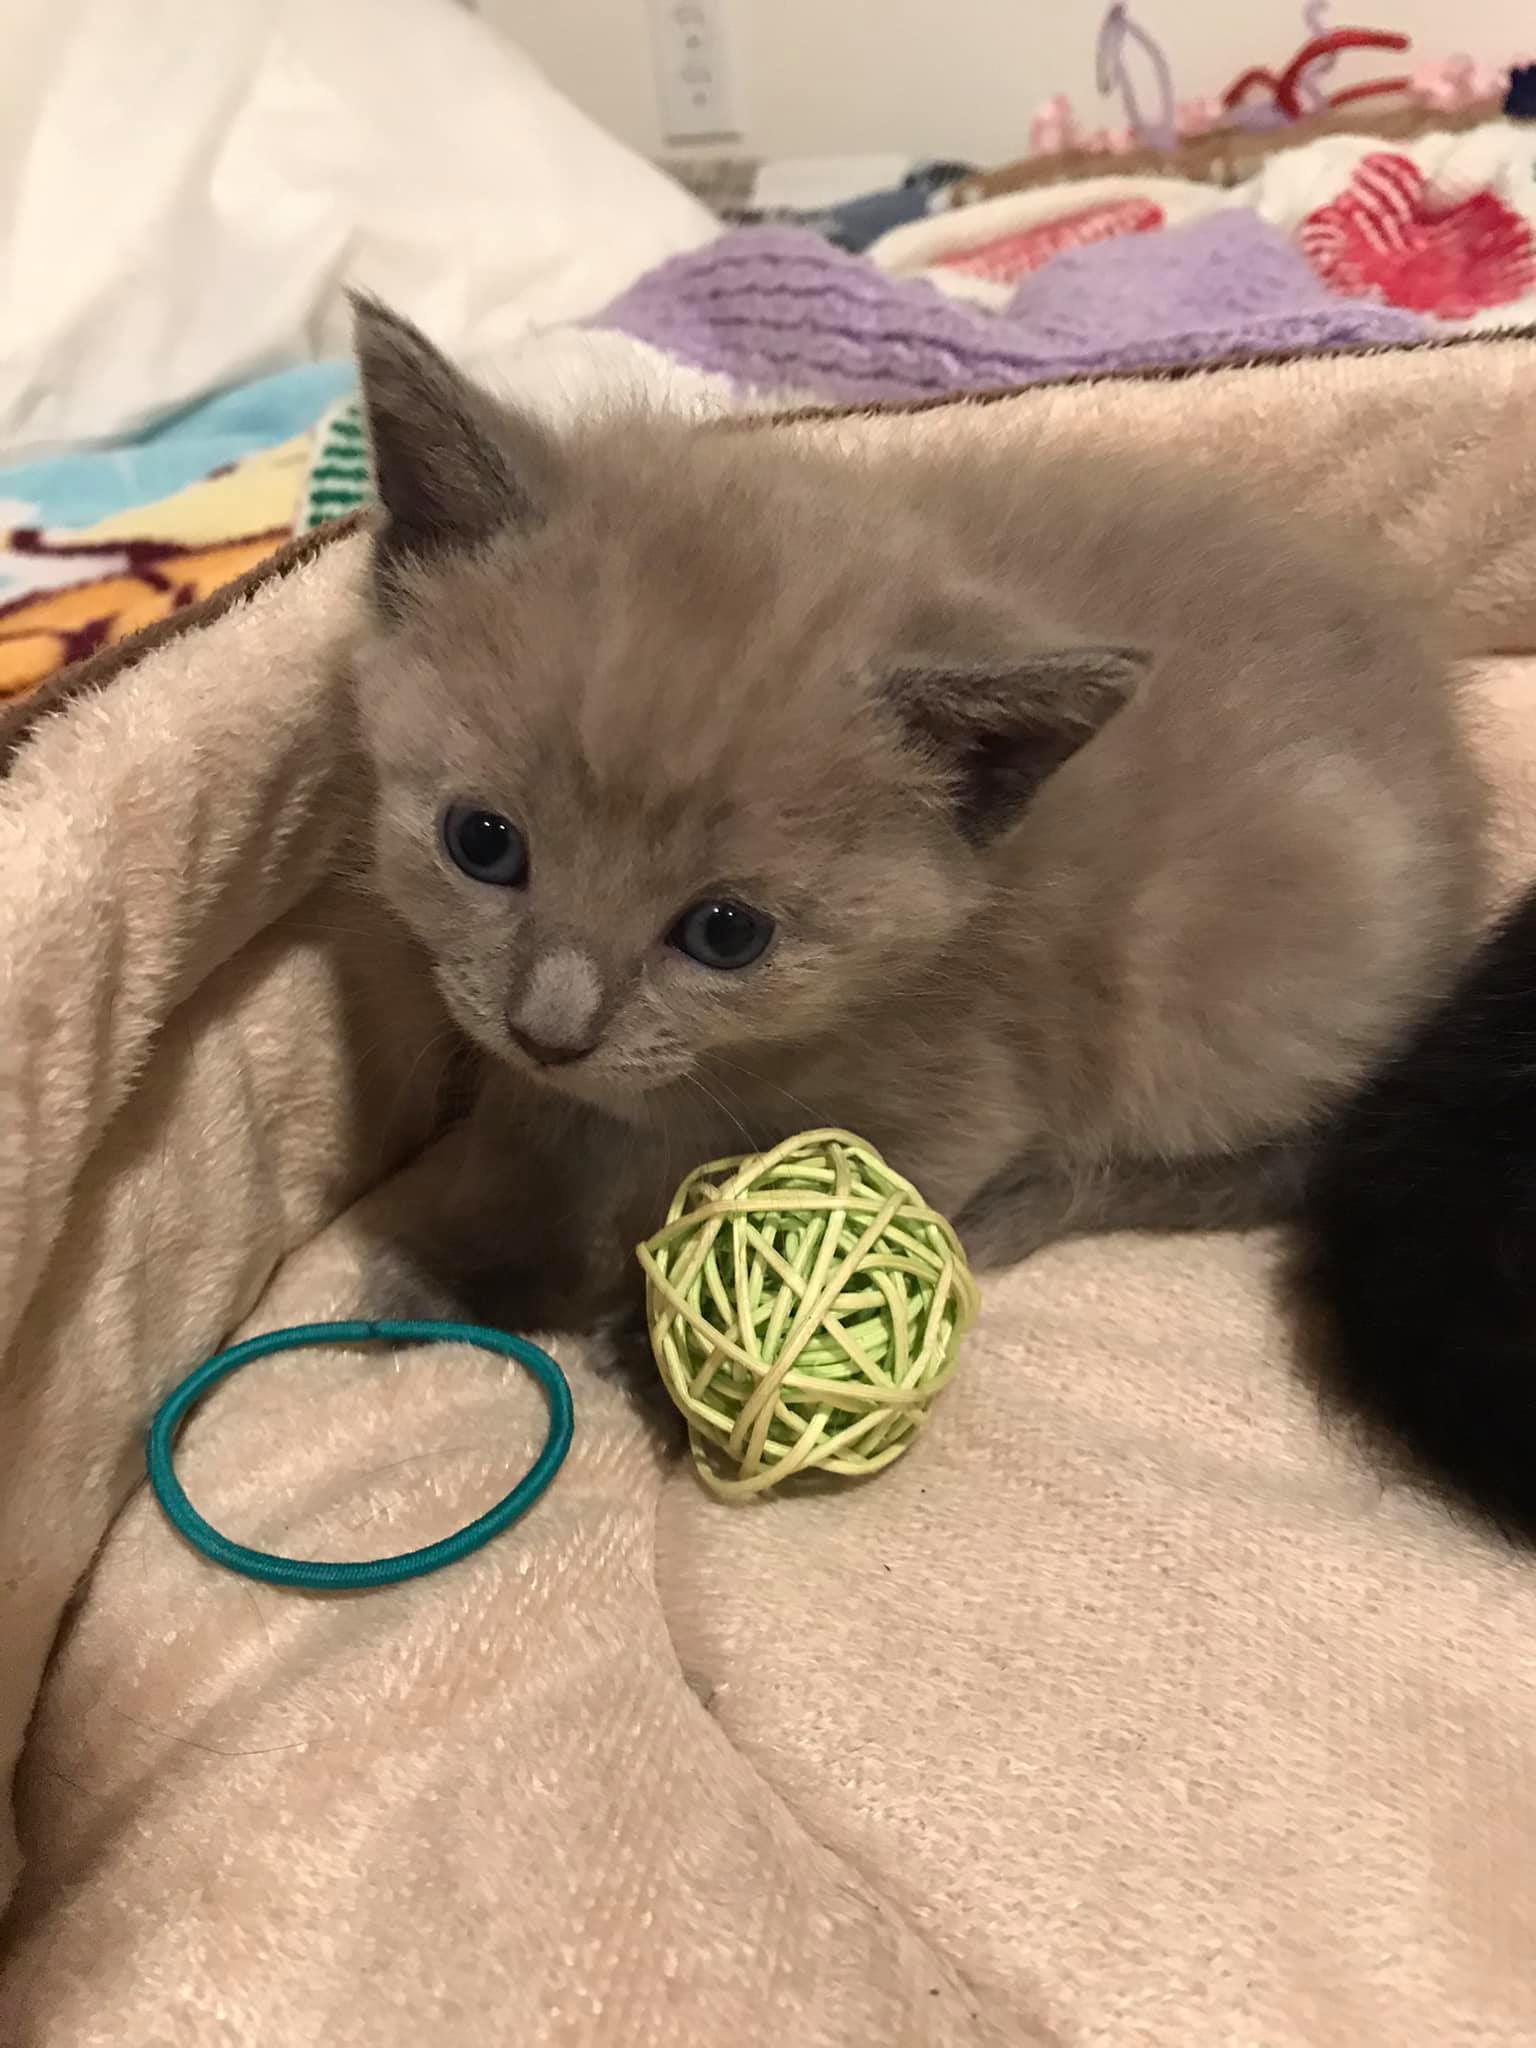 What color are these kittens? | TheCatSite